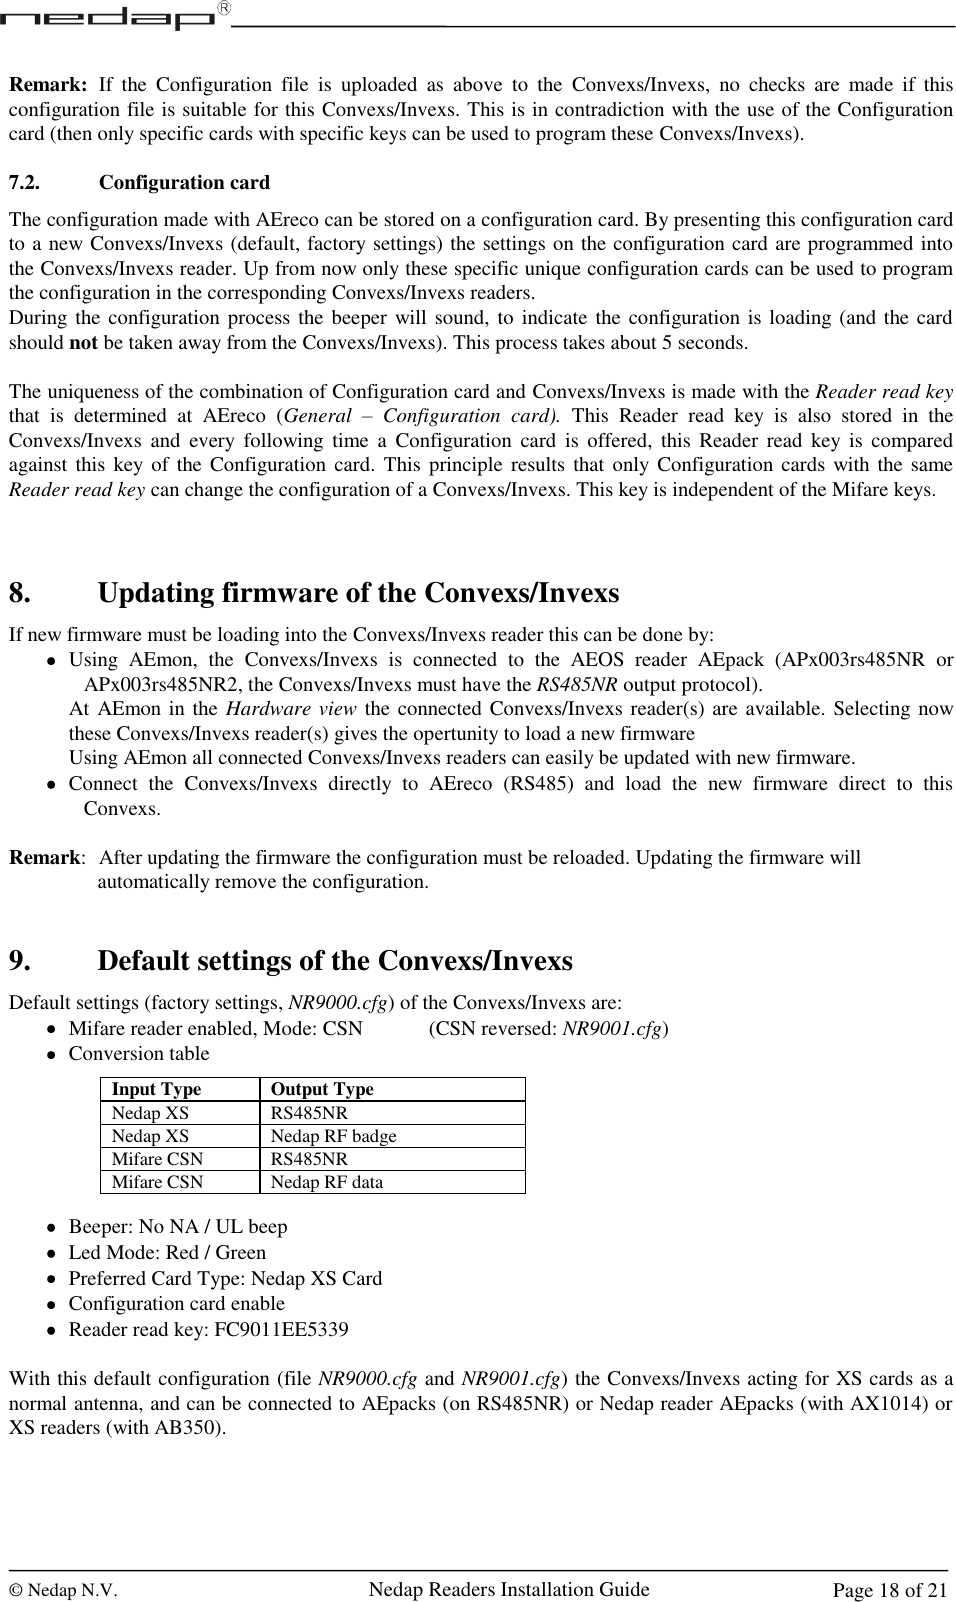  © Nedap N.V.                   Nedap Readers Installation Guide     Page 18 of 21 Remark:  If  the  Configuration  file  is  uploaded  as  above  to  the  Convexs/Invexs,  no  checks  are  made  if  this configuration file is suitable for this Convexs/Invexs. This is in contradiction with the use of the Configuration card (then only specific cards with specific keys can be used to program these Convexs/Invexs).  7.2. Configuration card The configuration made with AEreco can be stored on a configuration card. By presenting this configuration card to a new Convexs/Invexs (default, factory settings) the settings on the configuration card are programmed into the Convexs/Invexs reader. Up from now only these specific unique configuration cards can be used to program the configuration in the corresponding Convexs/Invexs readers. During the configuration process the beeper will sound, to indicate the  configuration is loading (and the card should not be taken away from the Convexs/Invexs). This process takes about 5 seconds.  The uniqueness of the combination of Configuration card and Convexs/Invexs is made with the Reader read key that  is  determined  at  AEreco  (General  –  Configuration  card).  This  Reader  read  key  is  also  stored  in  the Convexs/Invexs  and  every  following  time  a  Configuration  card  is  offered,  this Reader  read key is compared against this  key of the Configuration card.  This  principle  results  that  only Configuration cards with the same Reader read key can change the configuration of a Convexs/Invexs. This key is independent of the Mifare keys.    8. Updating firmware of the Convexs/Invexs If new firmware must be loading into the Convexs/Invexs reader this can be done by:  Using  AEmon,  the  Convexs/Invexs  is  connected  to  the  AEOS  reader  AEpack  (APx003rs485NR  or APx003rs485NR2, the Convexs/Invexs must have the RS485NR output protocol). At AEmon in the Hardware view the connected Convexs/Invexs reader(s) are available. Selecting now these Convexs/Invexs reader(s) gives the opertunity to load a new firmware Using AEmon all connected Convexs/Invexs readers can easily be updated with new firmware.  Connect  the  Convexs/Invexs  directly  to  AEreco  (RS485)  and  load  the  new  firmware  direct  to  this Convexs.  Remark:  After updating the firmware the configuration must be reloaded. Updating the firmware will  automatically remove the configuration.   9. Default settings of the Convexs/Invexs Default settings (factory settings, NR9000.cfg) of the Convexs/Invexs are:  Mifare reader enabled, Mode: CSN     (CSN reversed: NR9001.cfg)  Conversion table        Beeper: No NA / UL beep  Led Mode: Red / Green  Preferred Card Type: Nedap XS Card  Configuration card enable  Reader read key: FC9011EE5339  With this default configuration (file NR9000.cfg and NR9001.cfg) the Convexs/Invexs acting for XS cards as a normal antenna, and can be connected to AEpacks (on RS485NR) or Nedap reader AEpacks (with AX1014) or XS readers (with AB350).  Input Type Output Type Nedap XS RS485NR Nedap XS Nedap RF badge Mifare CSN RS485NR Mifare CSN Nedap RF data  